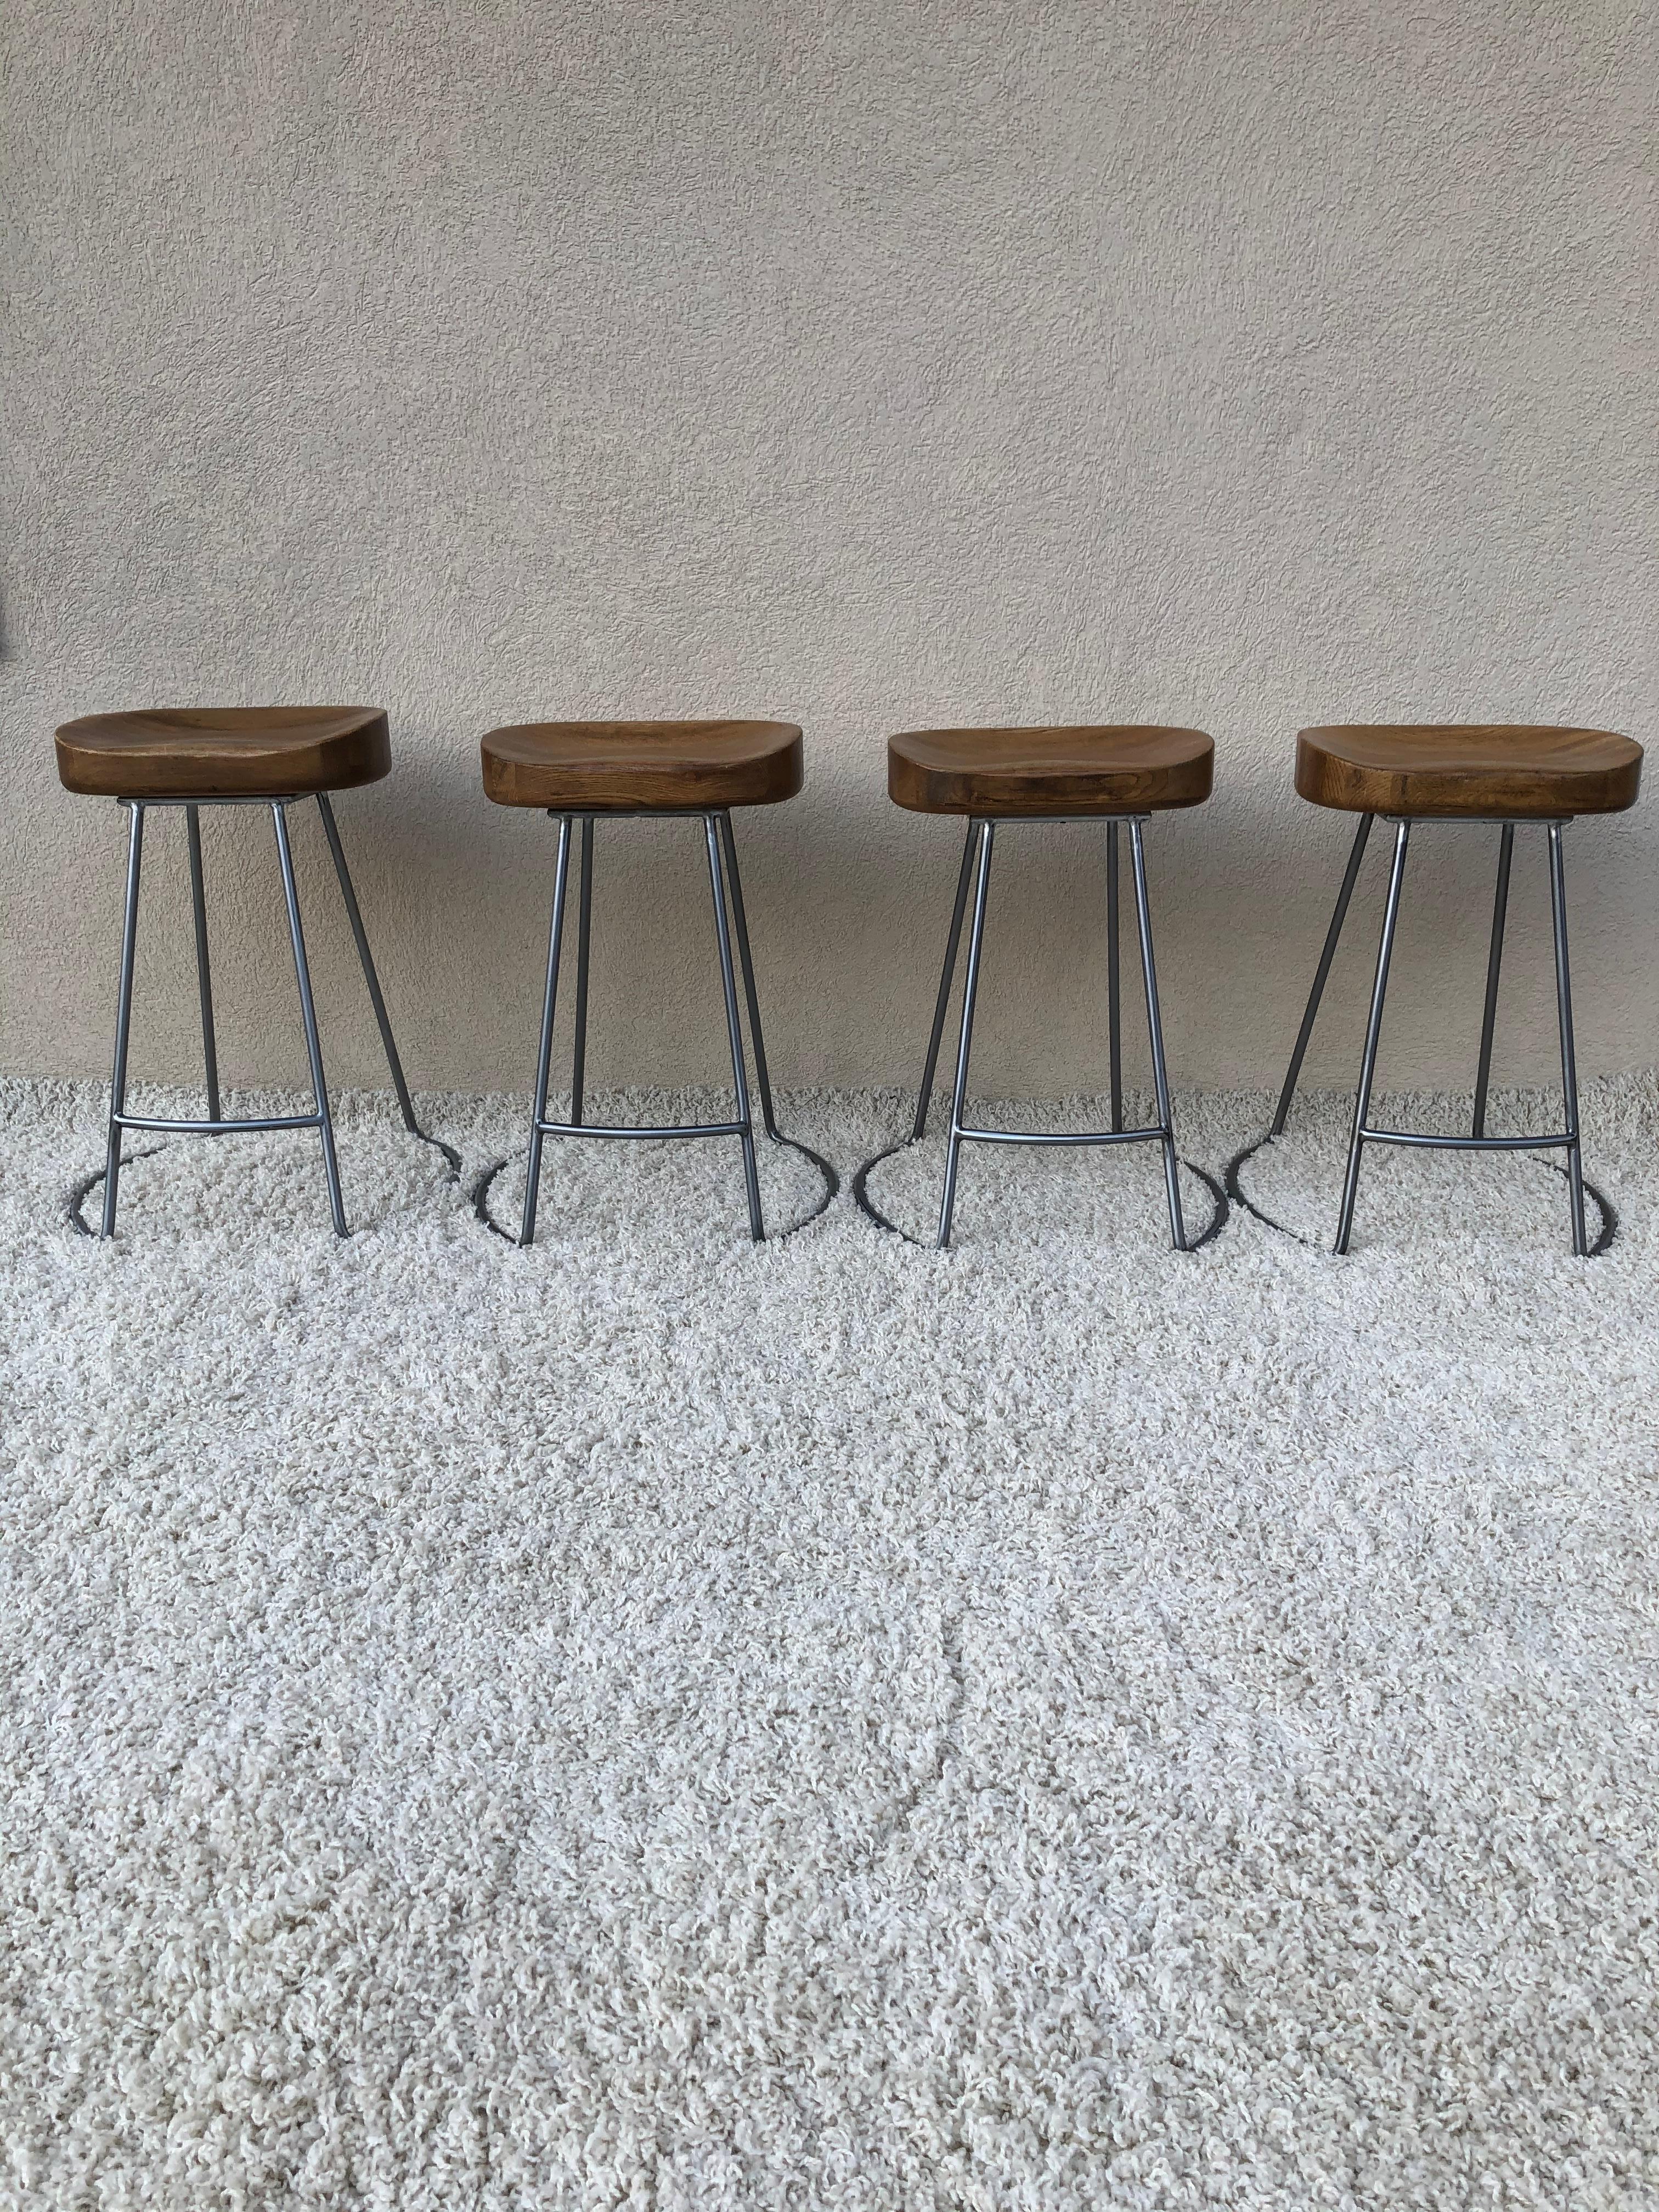 Set of 4 vintage solid steel color, these stools are silver metal bases. Brushed polished finish stools counter stools/ bar stools, with heavy solid oak tops. Stools appear to be early design I have seen others similar but this weight is 20lbs each